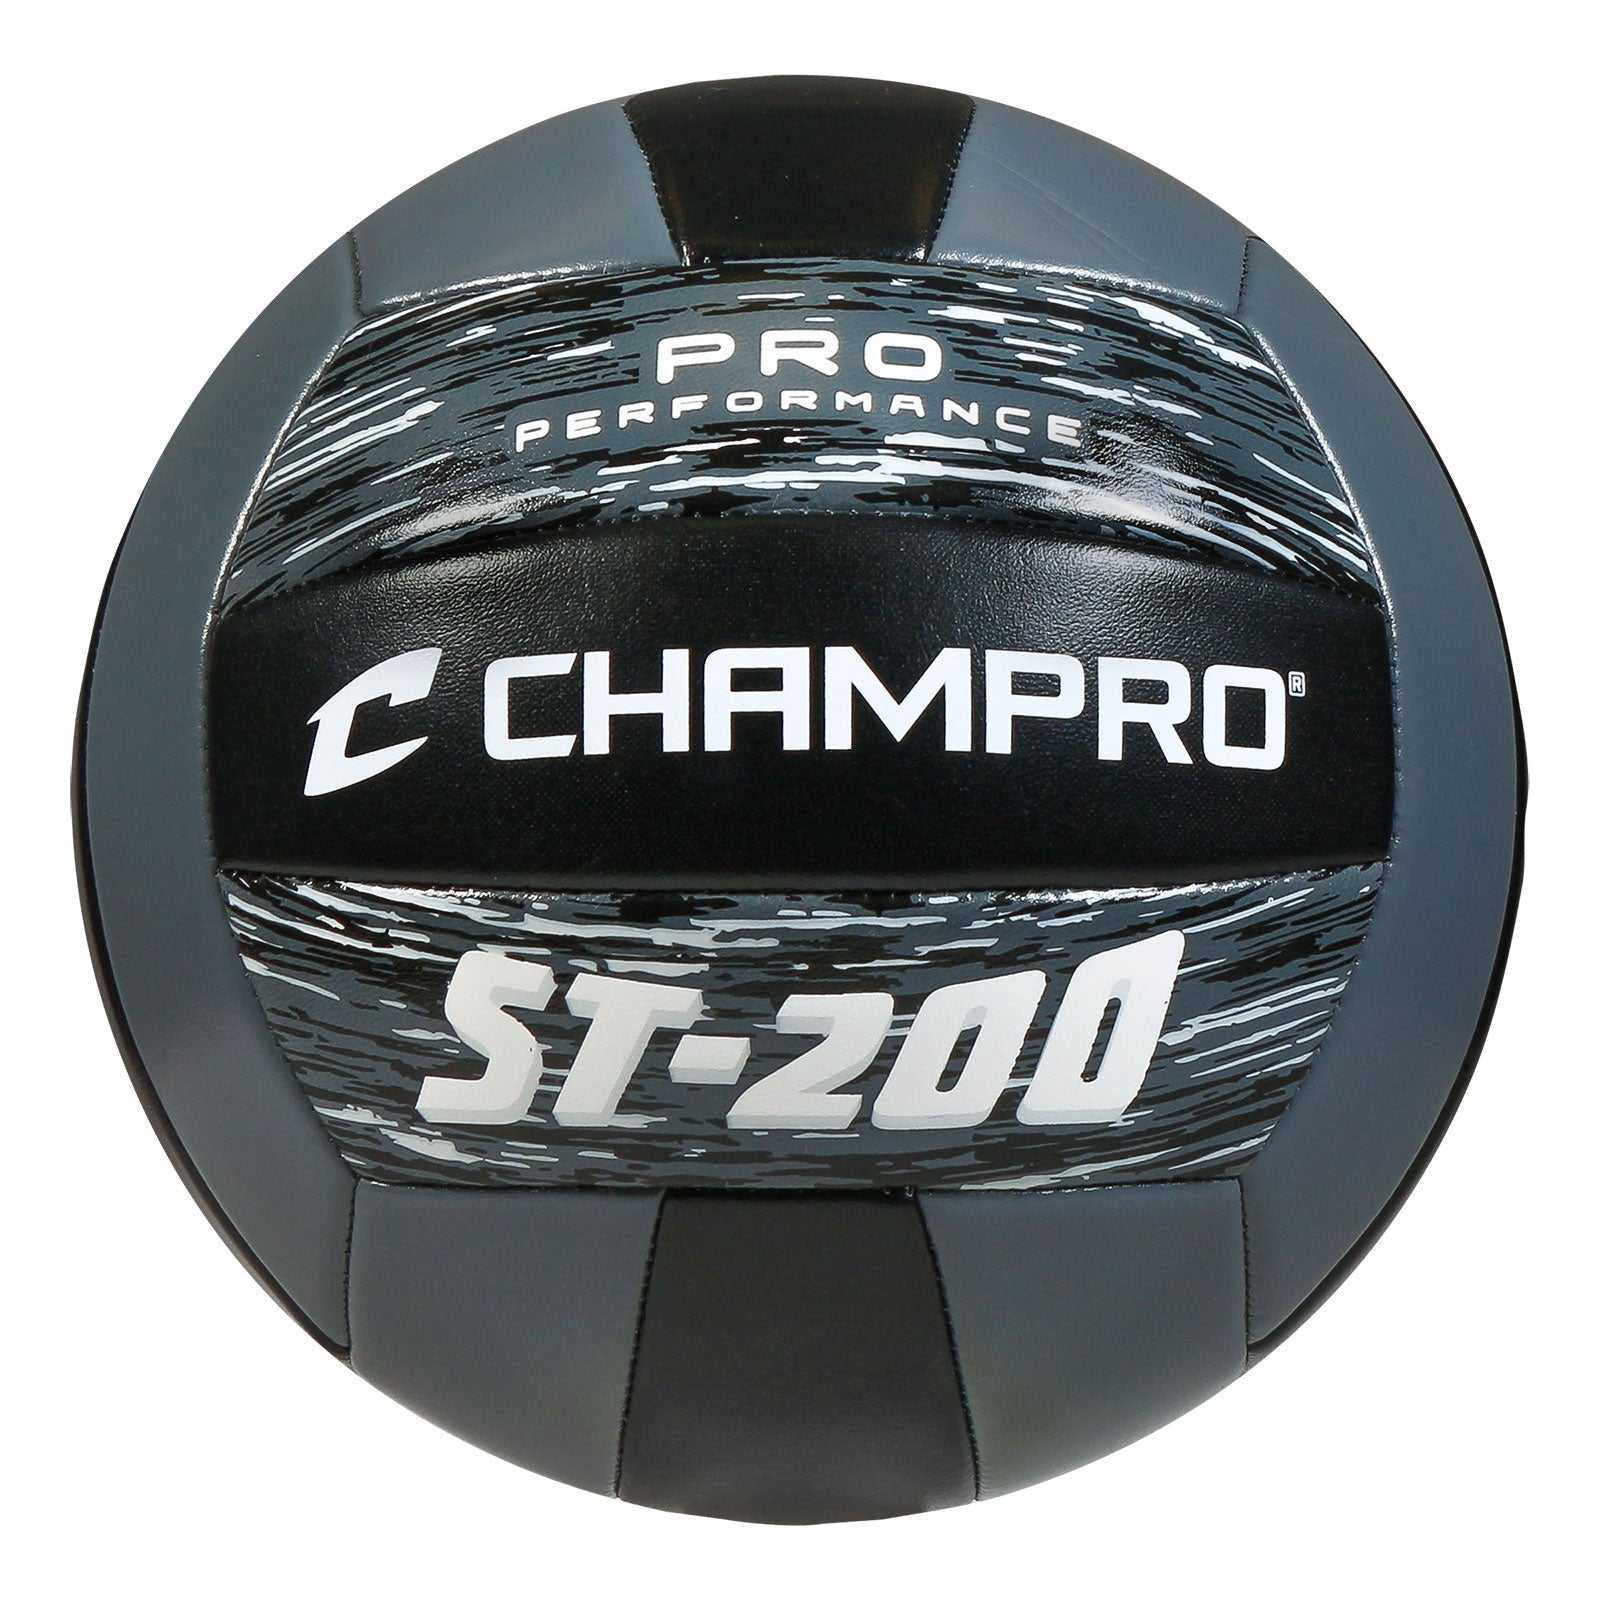 Champro VB-ST200 St200 Pro Perforamnce Volleyball - Camo Black - HIT a Double